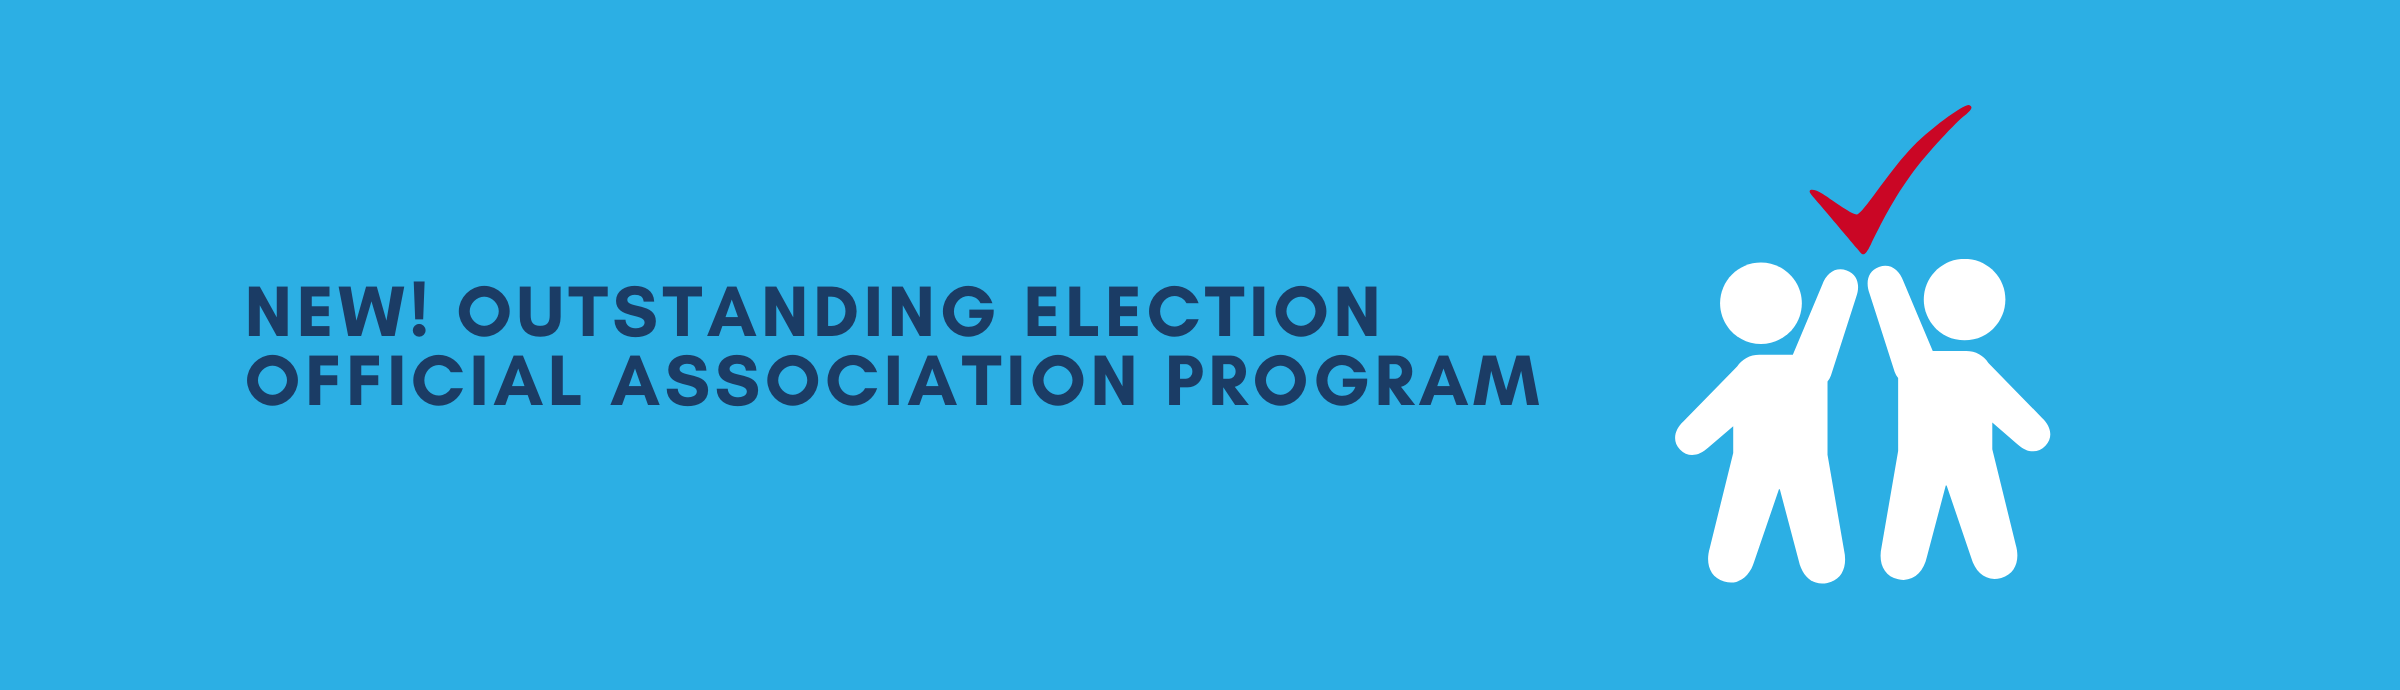 The text to the right reads "New! Outstanding Election Official Association Program" and to the left is an image of two blue human figures high fiving with a red check mark above their hands.